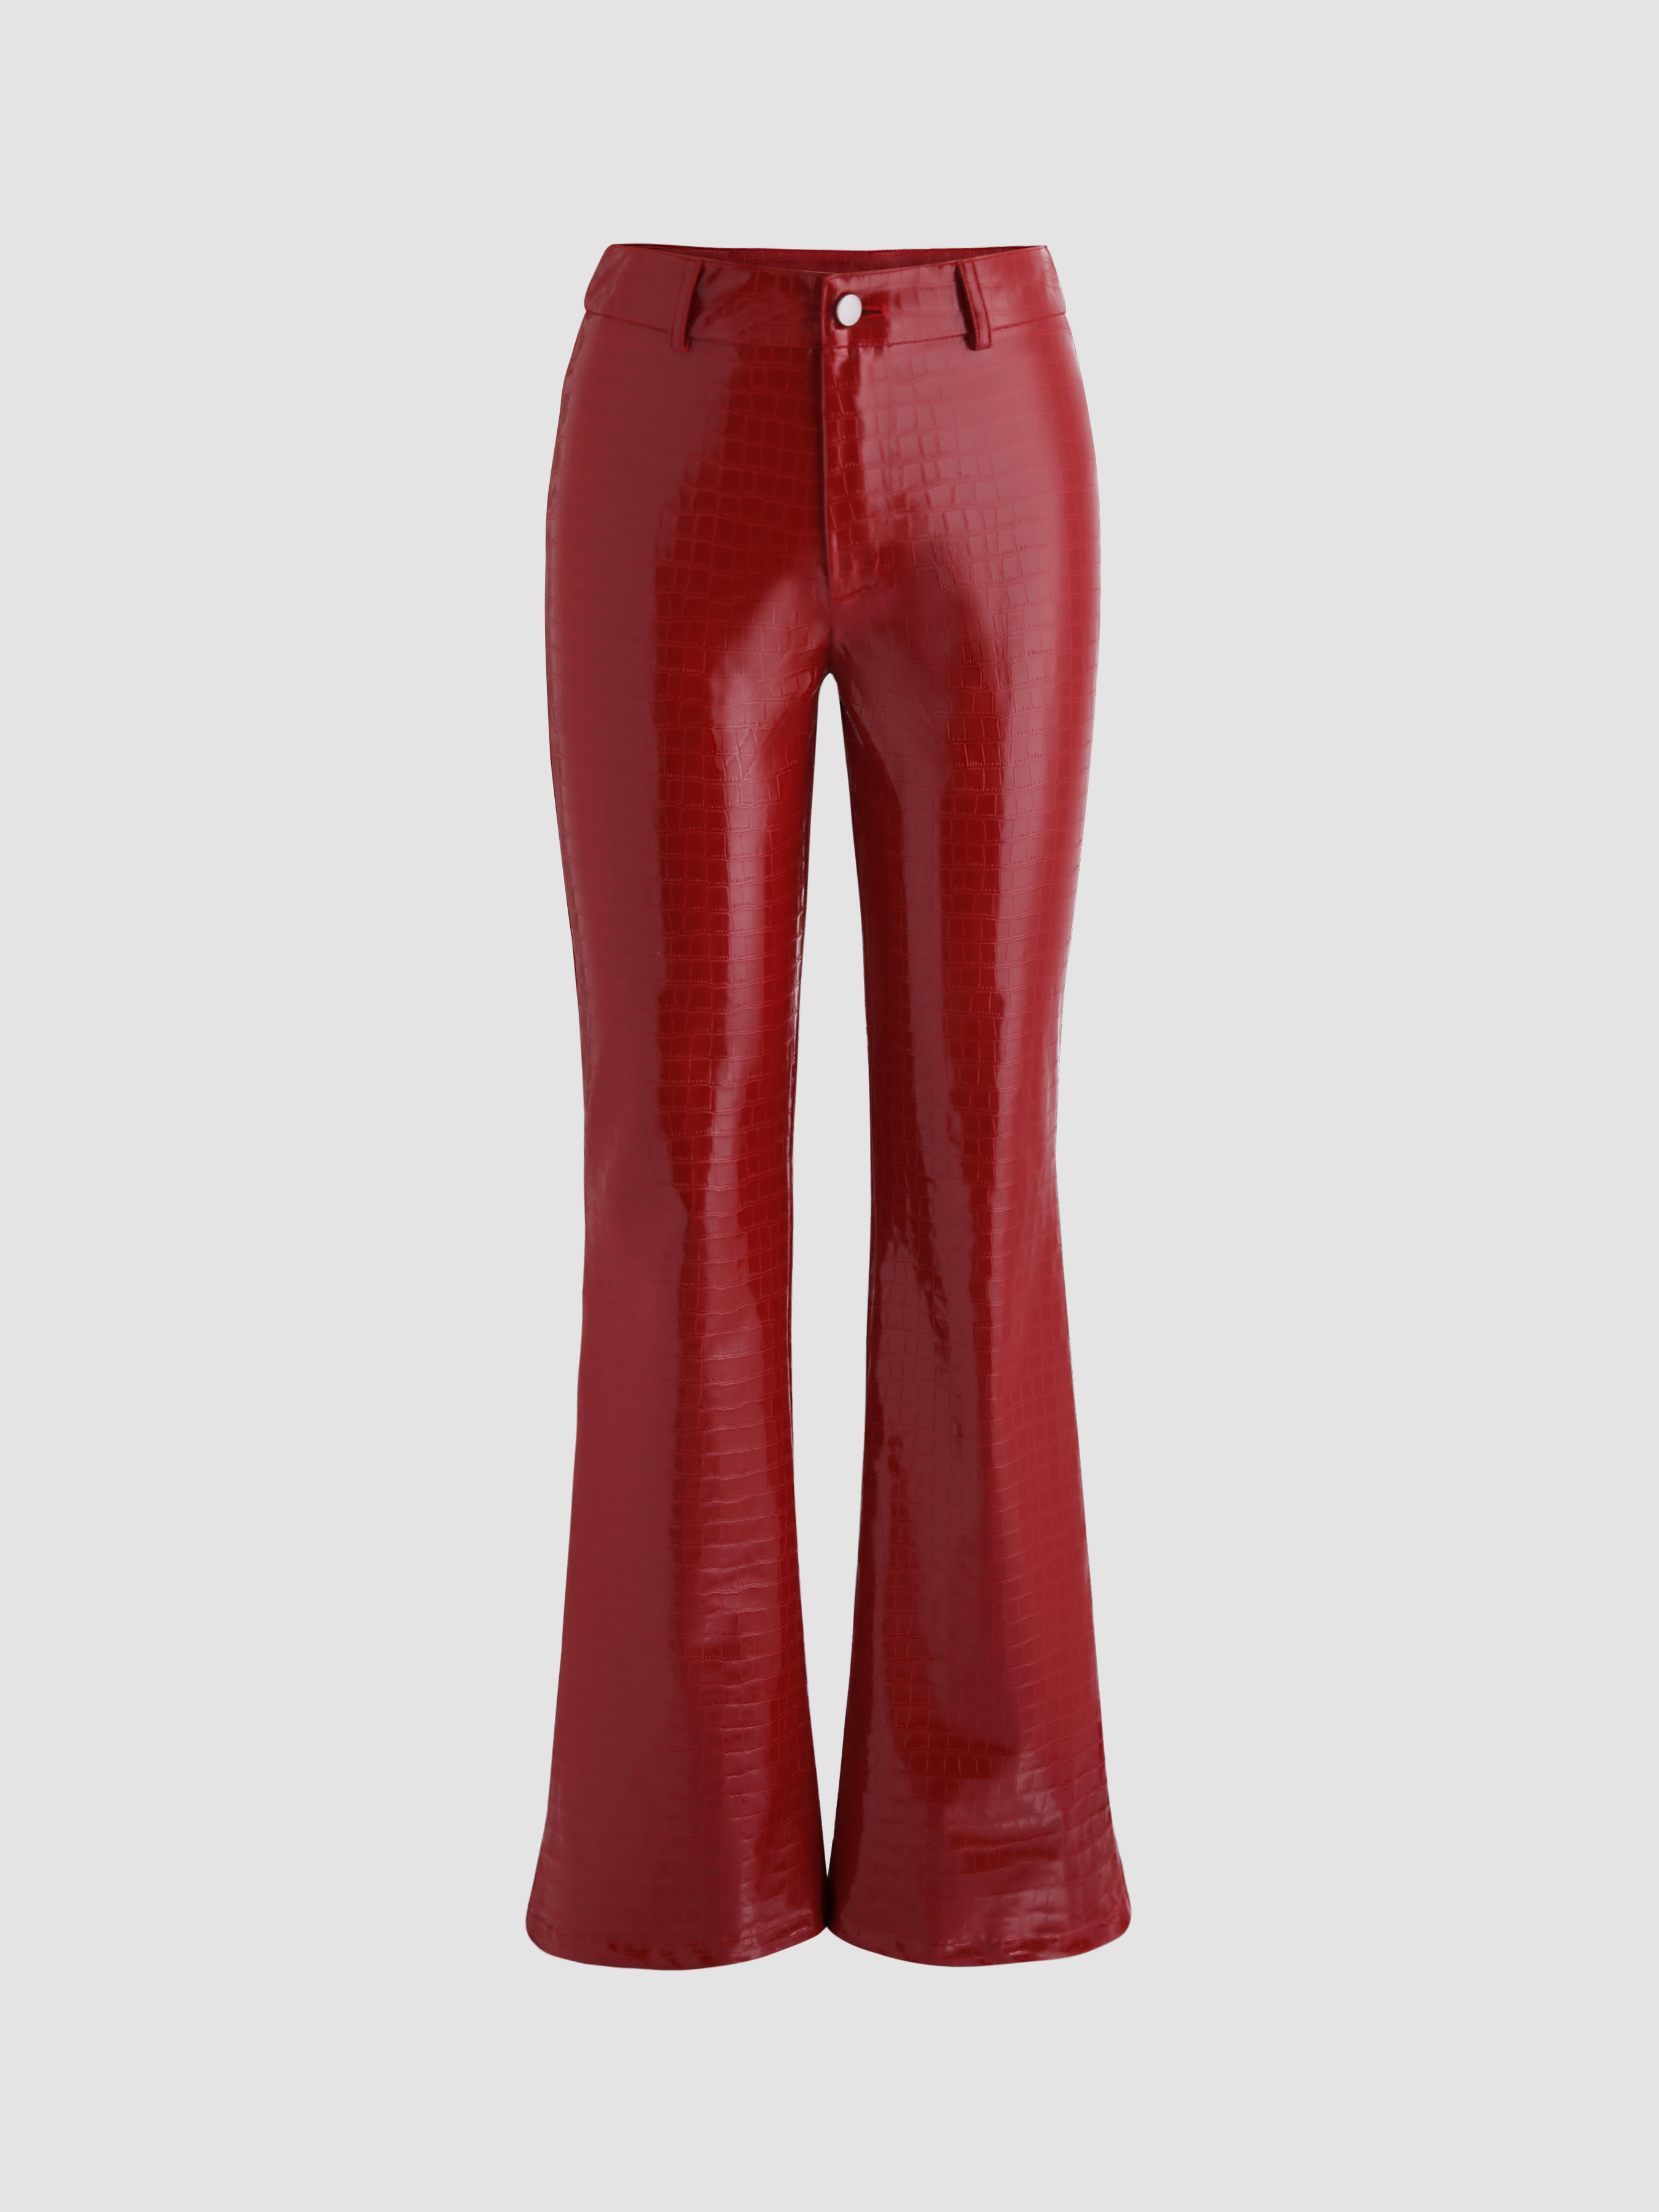 Cherry Red Faux Leather Skinny Flare Pants